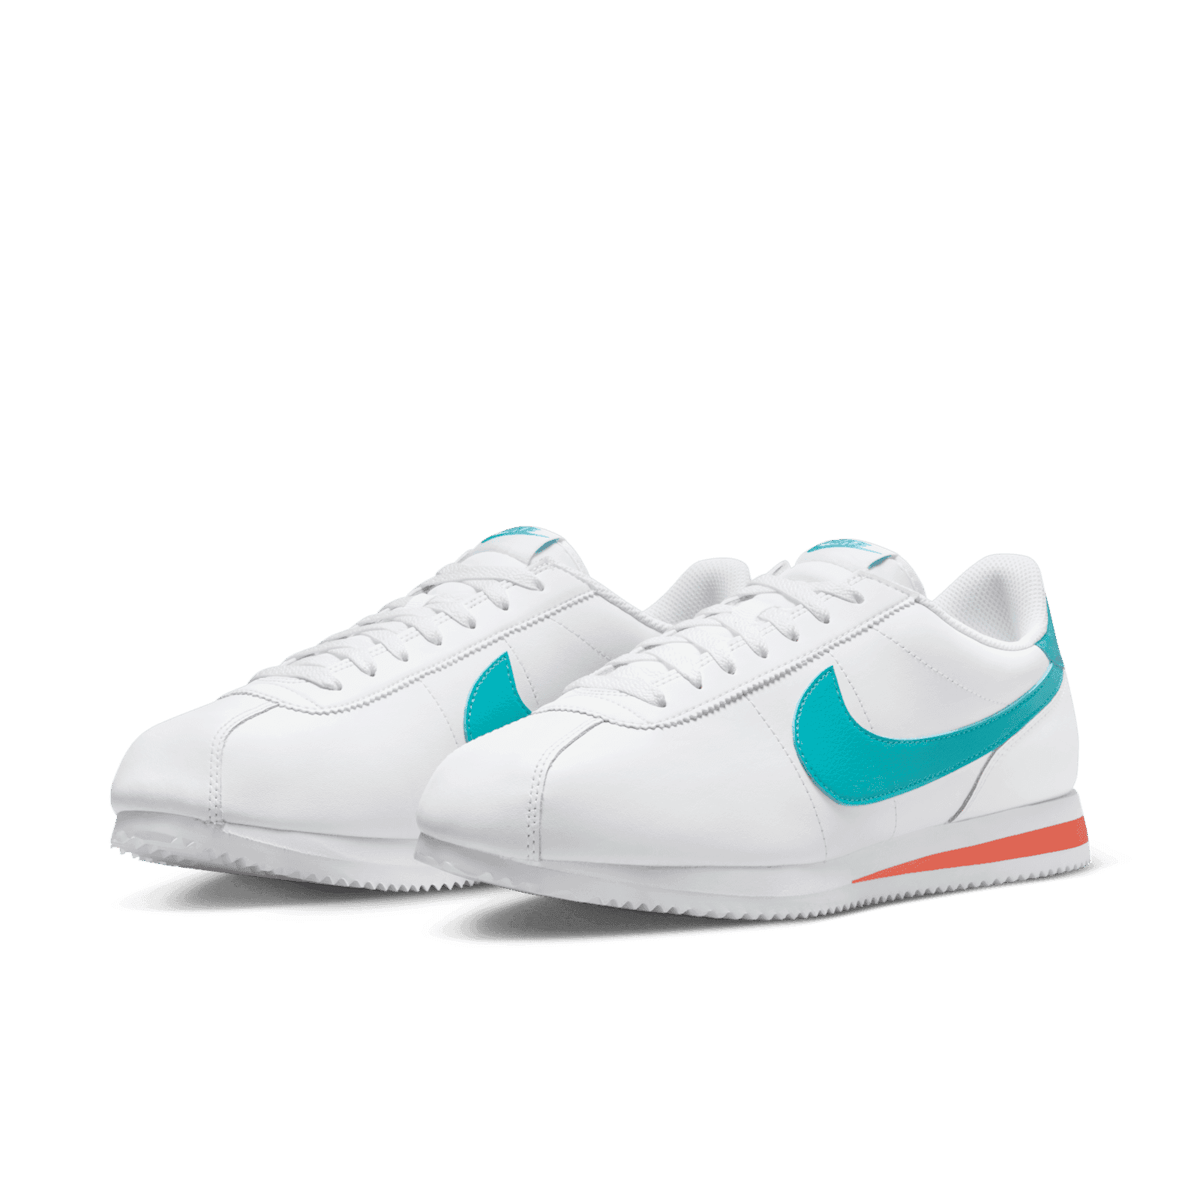 Nike Cortez Miami Dolphins - DM4044-103 Raffles and Release Date